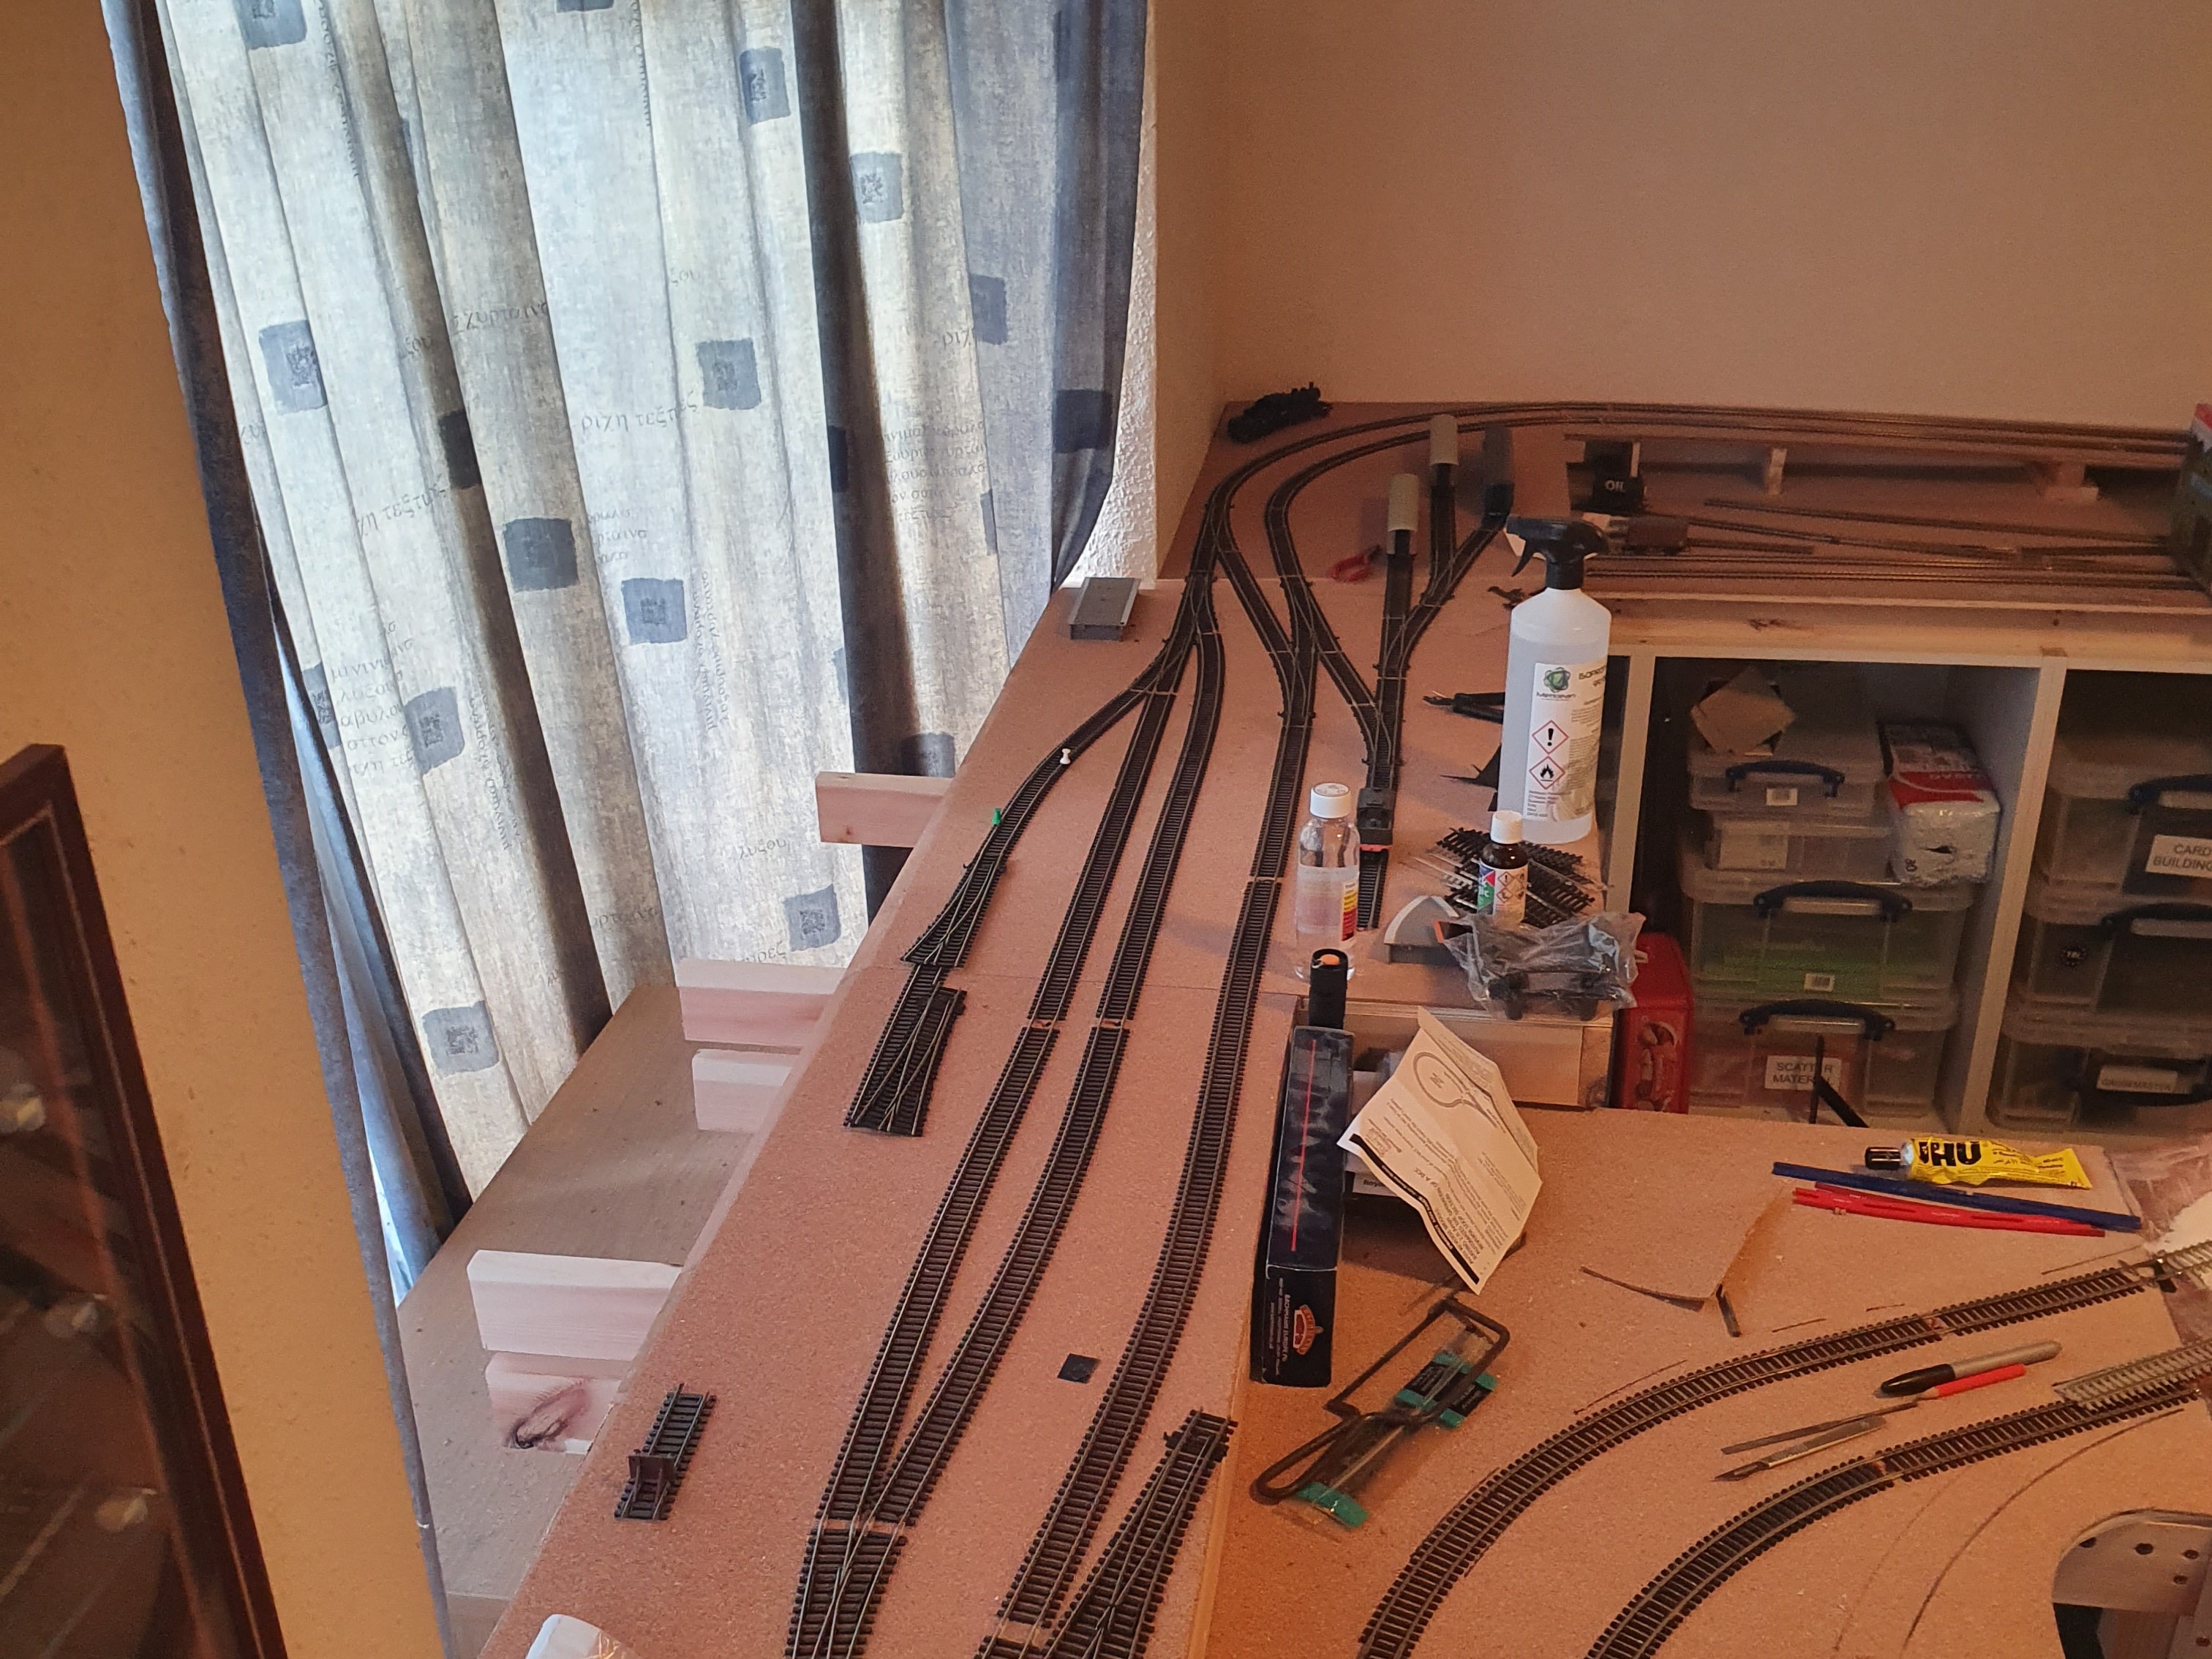 With Baseboard and track